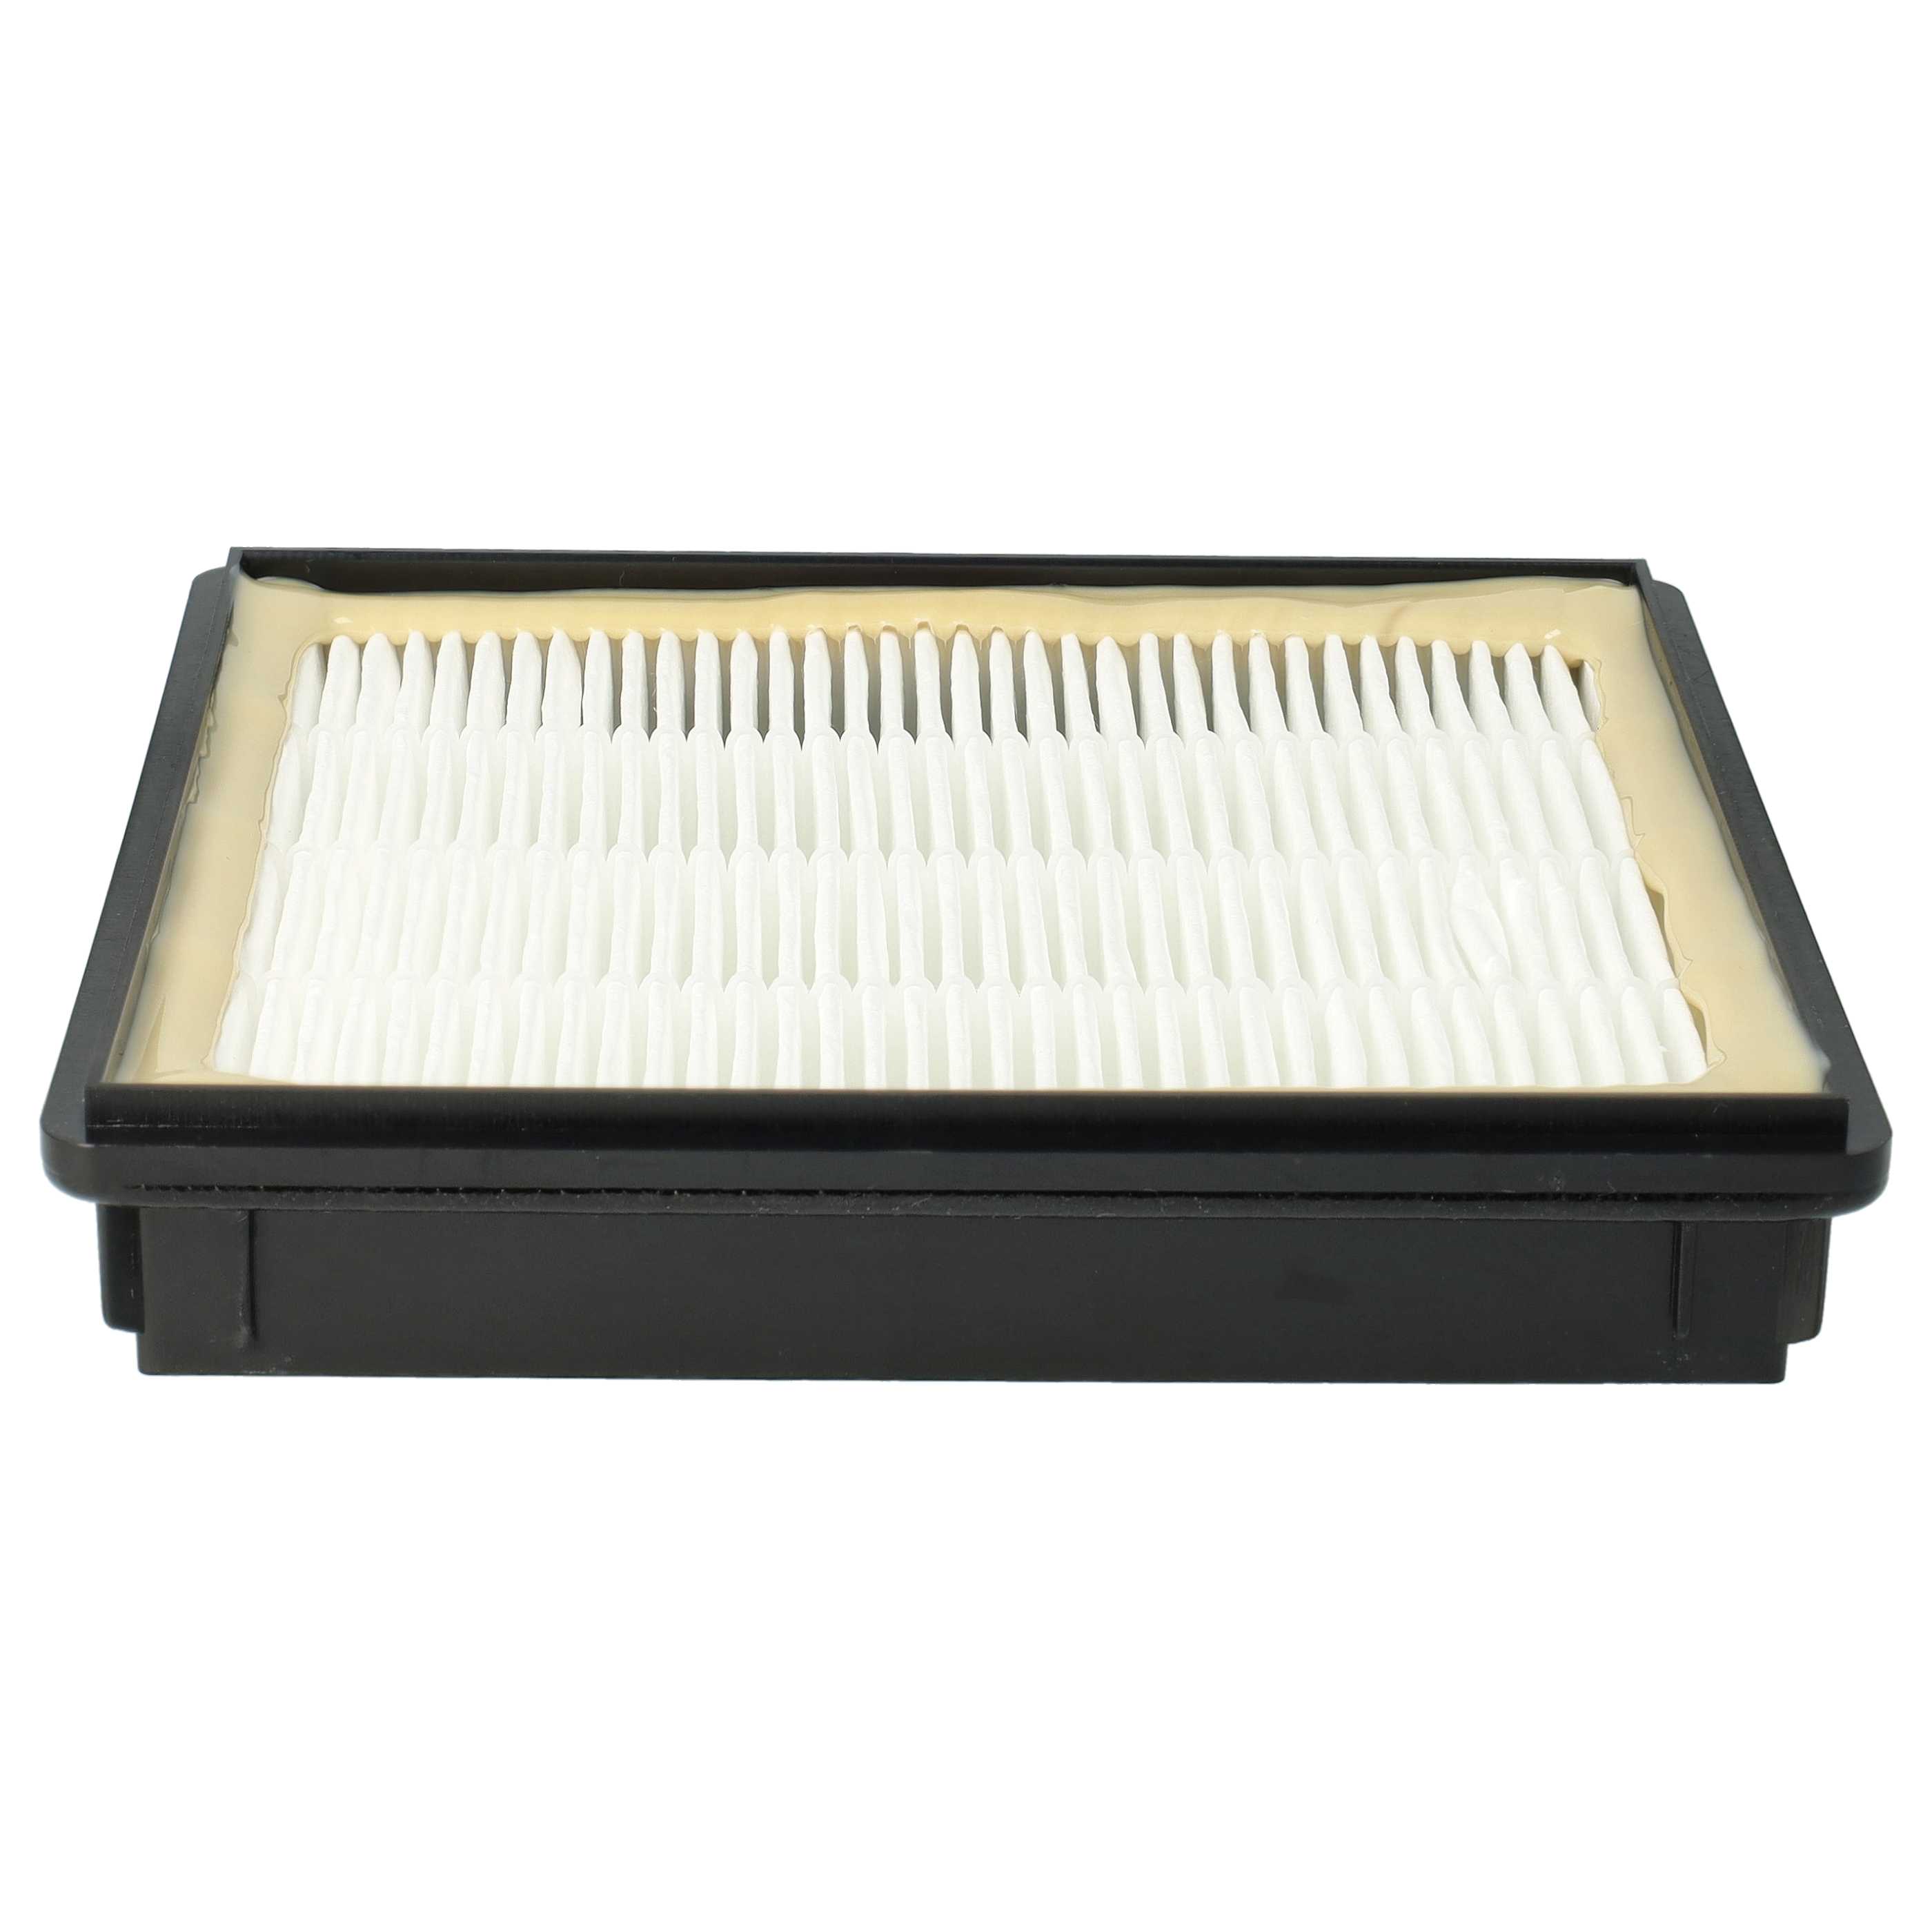 1x HEPA filter replaces Nilfisk 21983000 for Nilfisk Vacuum Cleaner, filter class H14